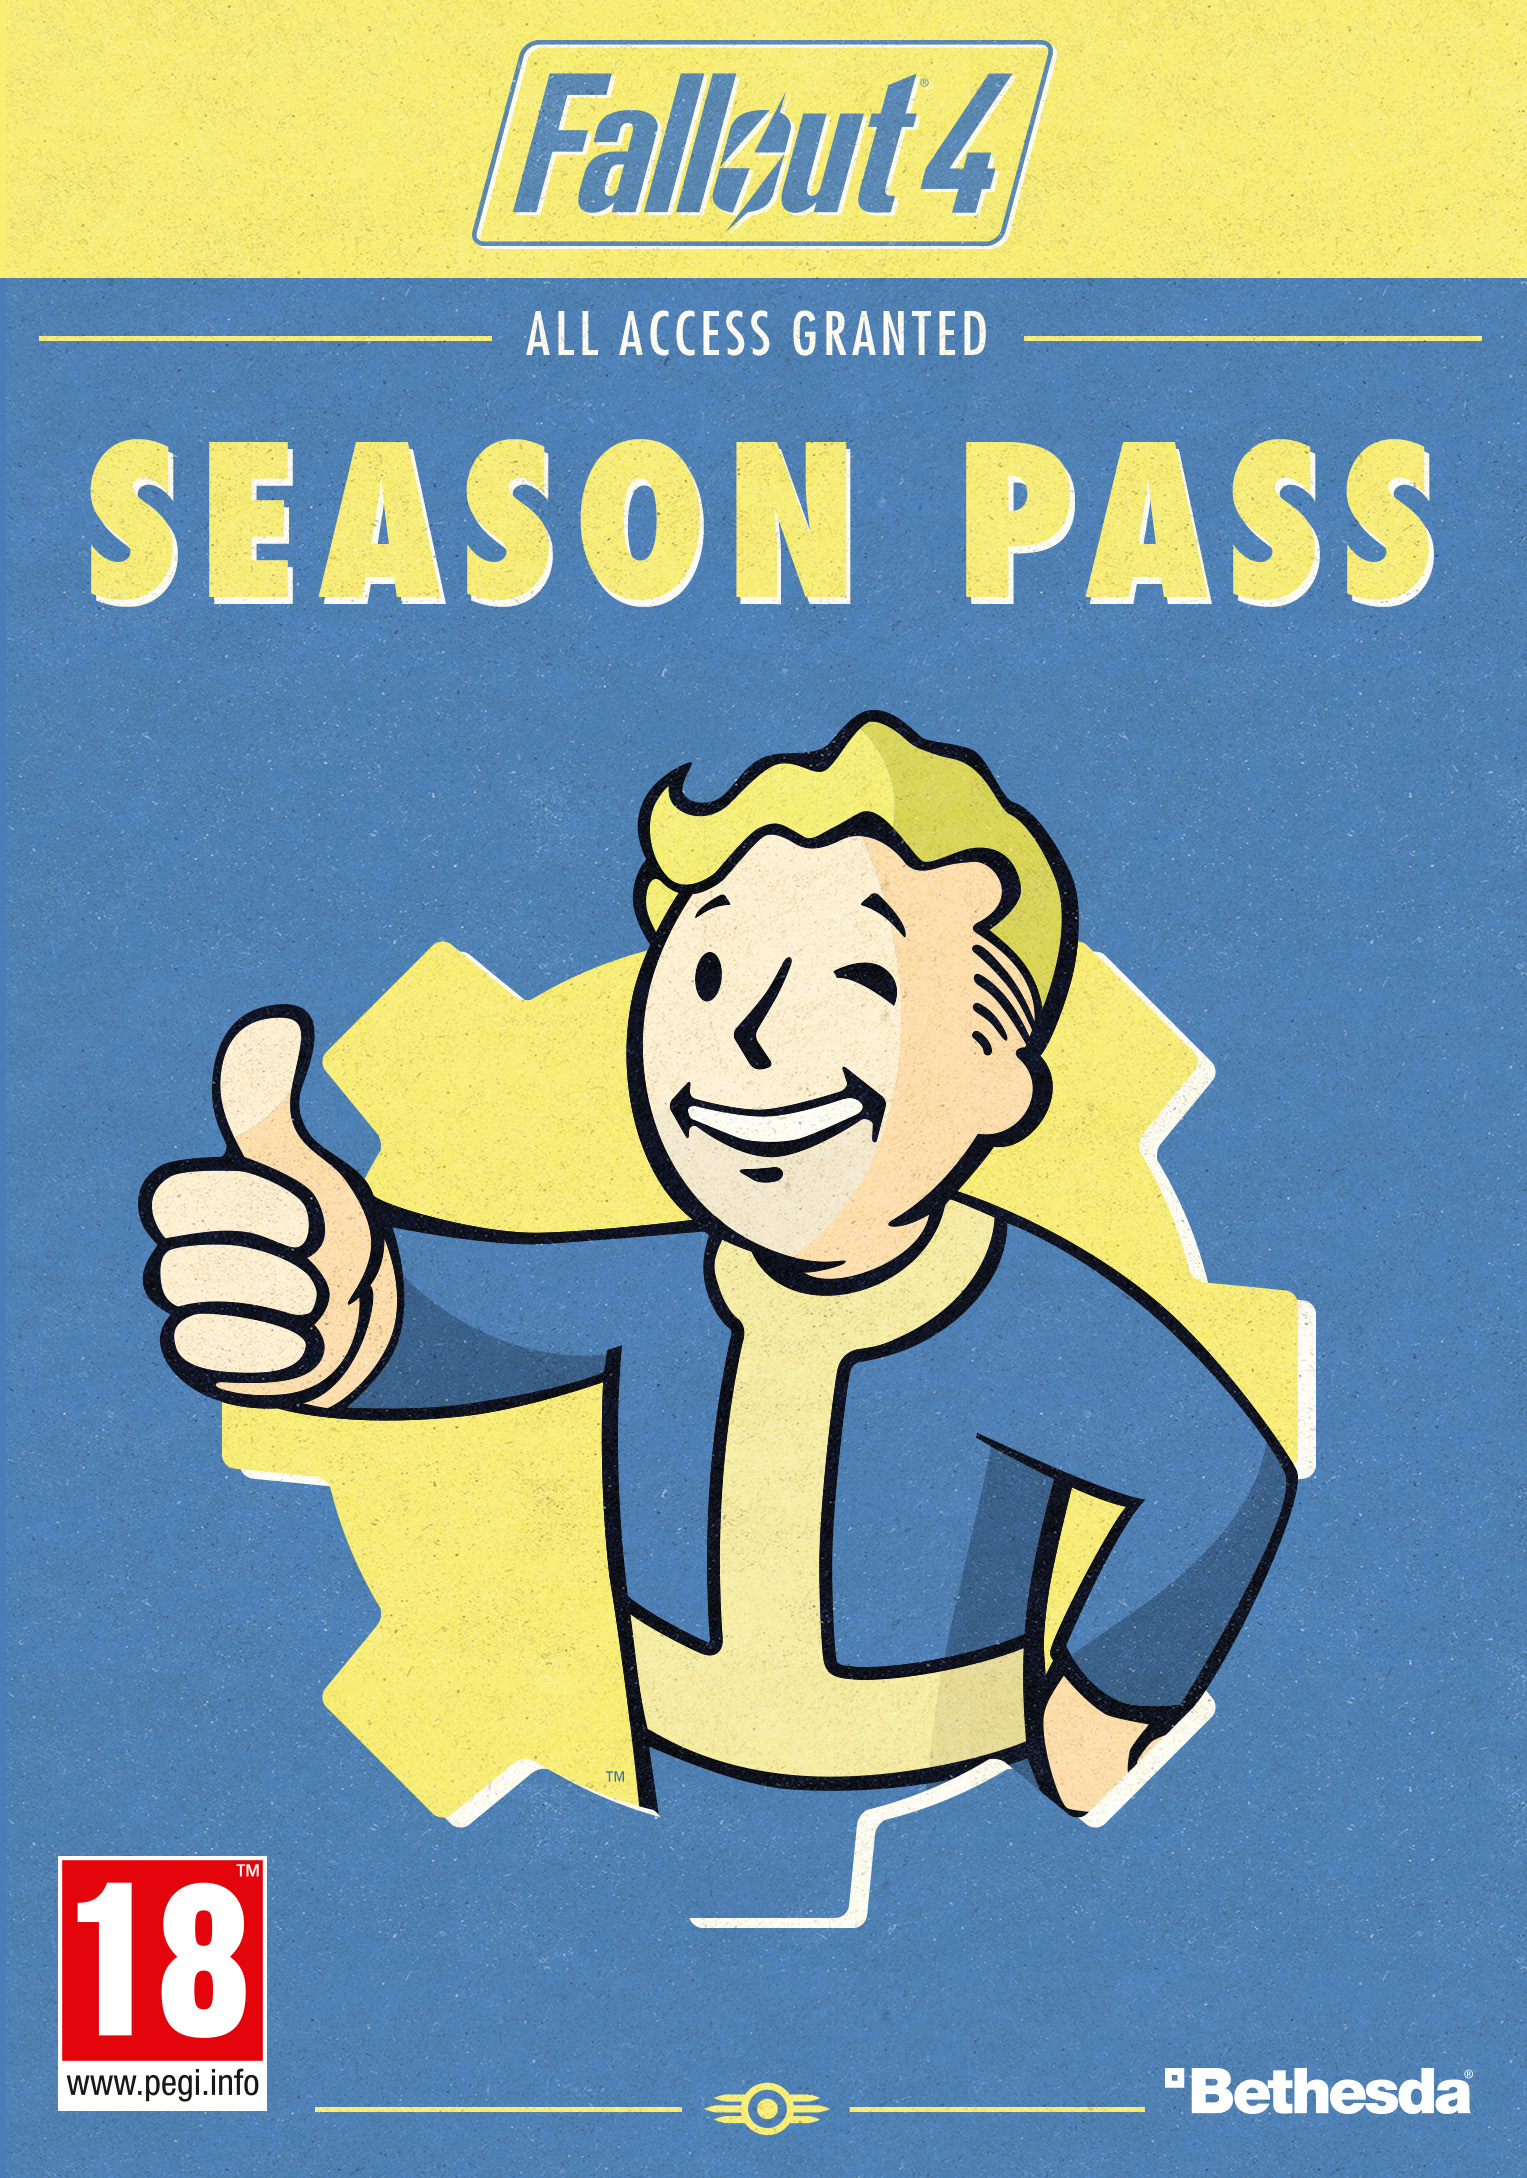 how much does fallout 4 cost